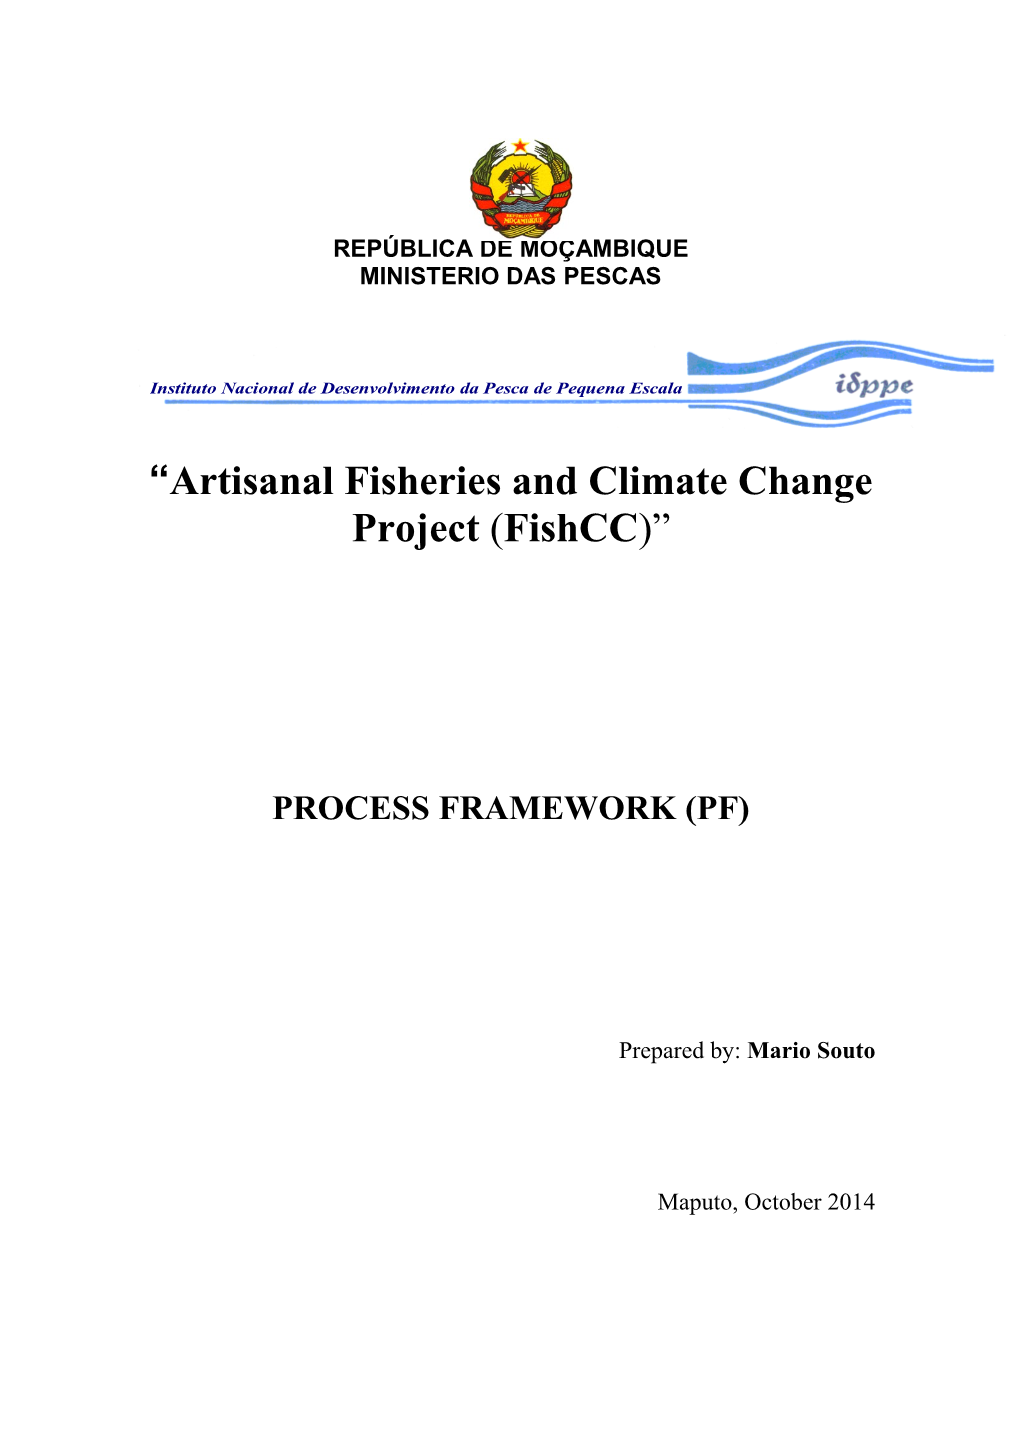 Artisanal Fisheries and Climate Change Project (Fishcc )